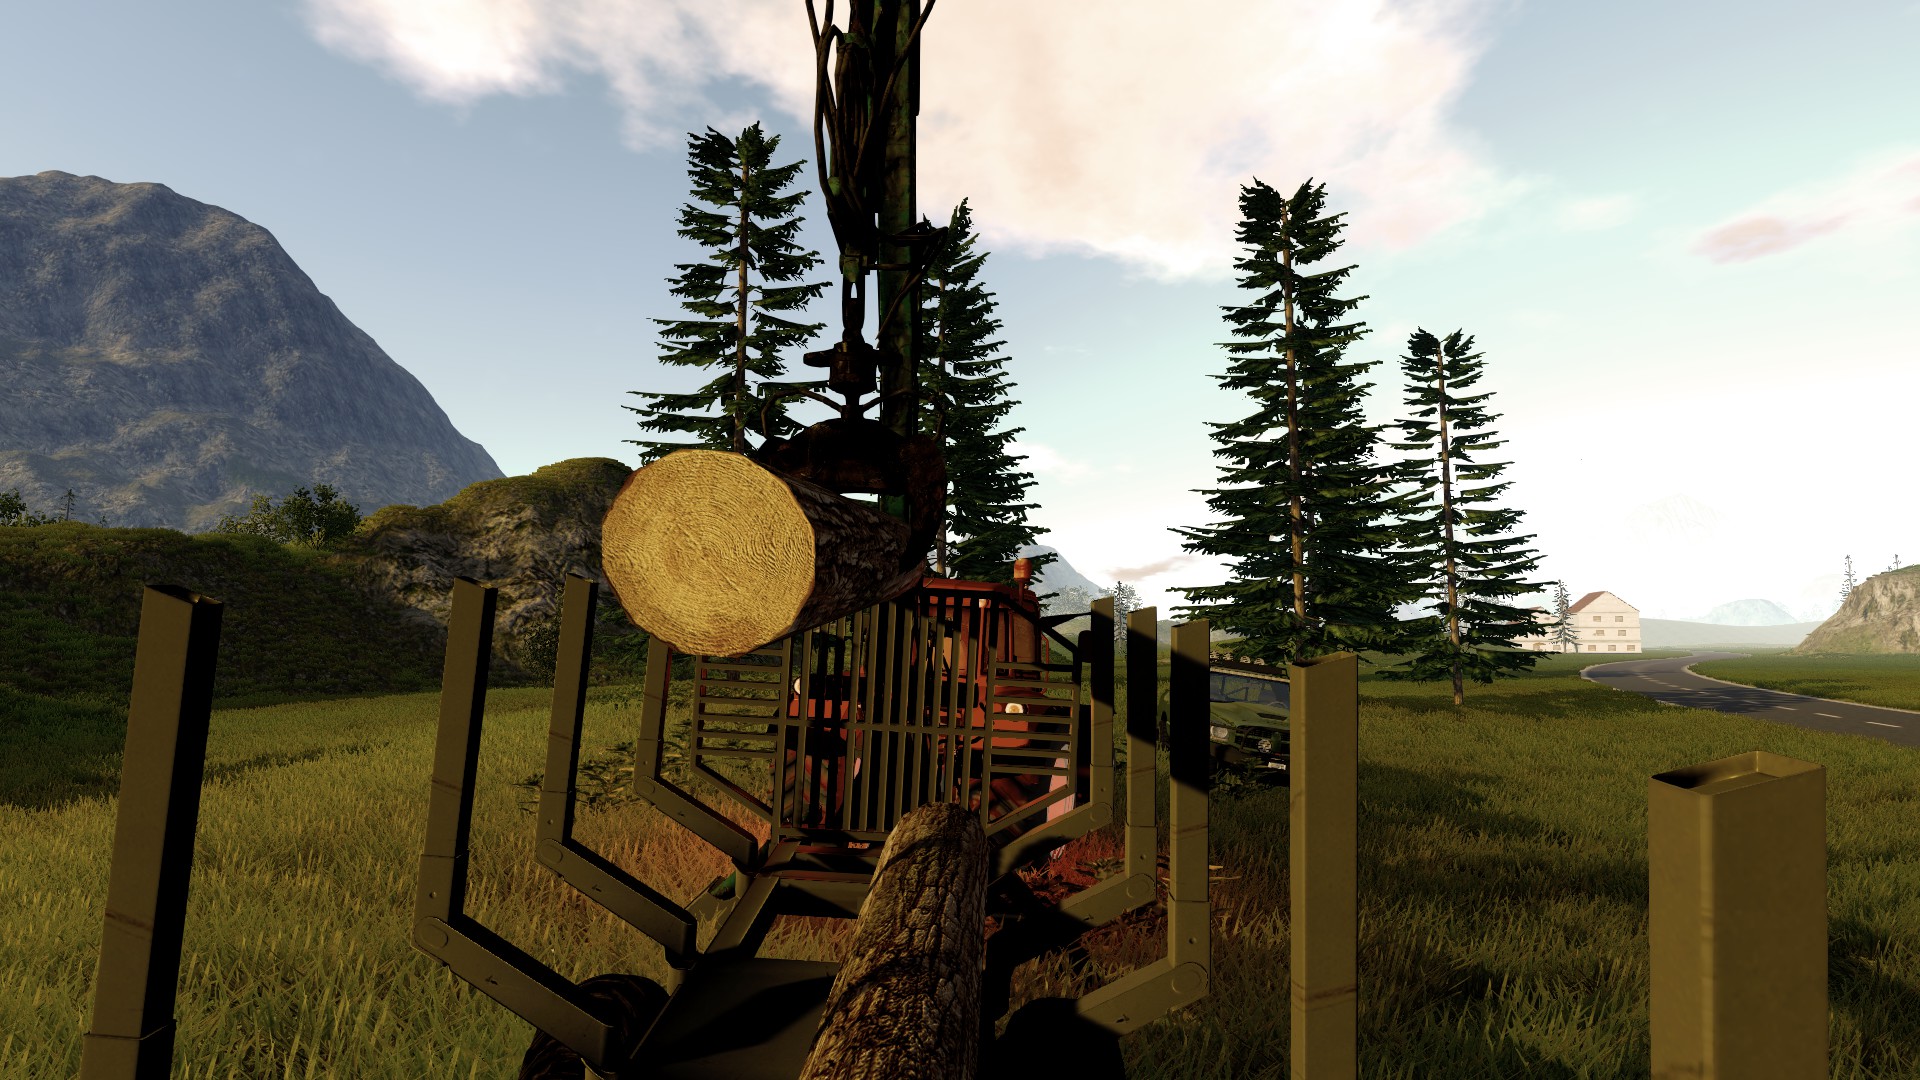 Forestry 2017: The Simulation - screenshot 7